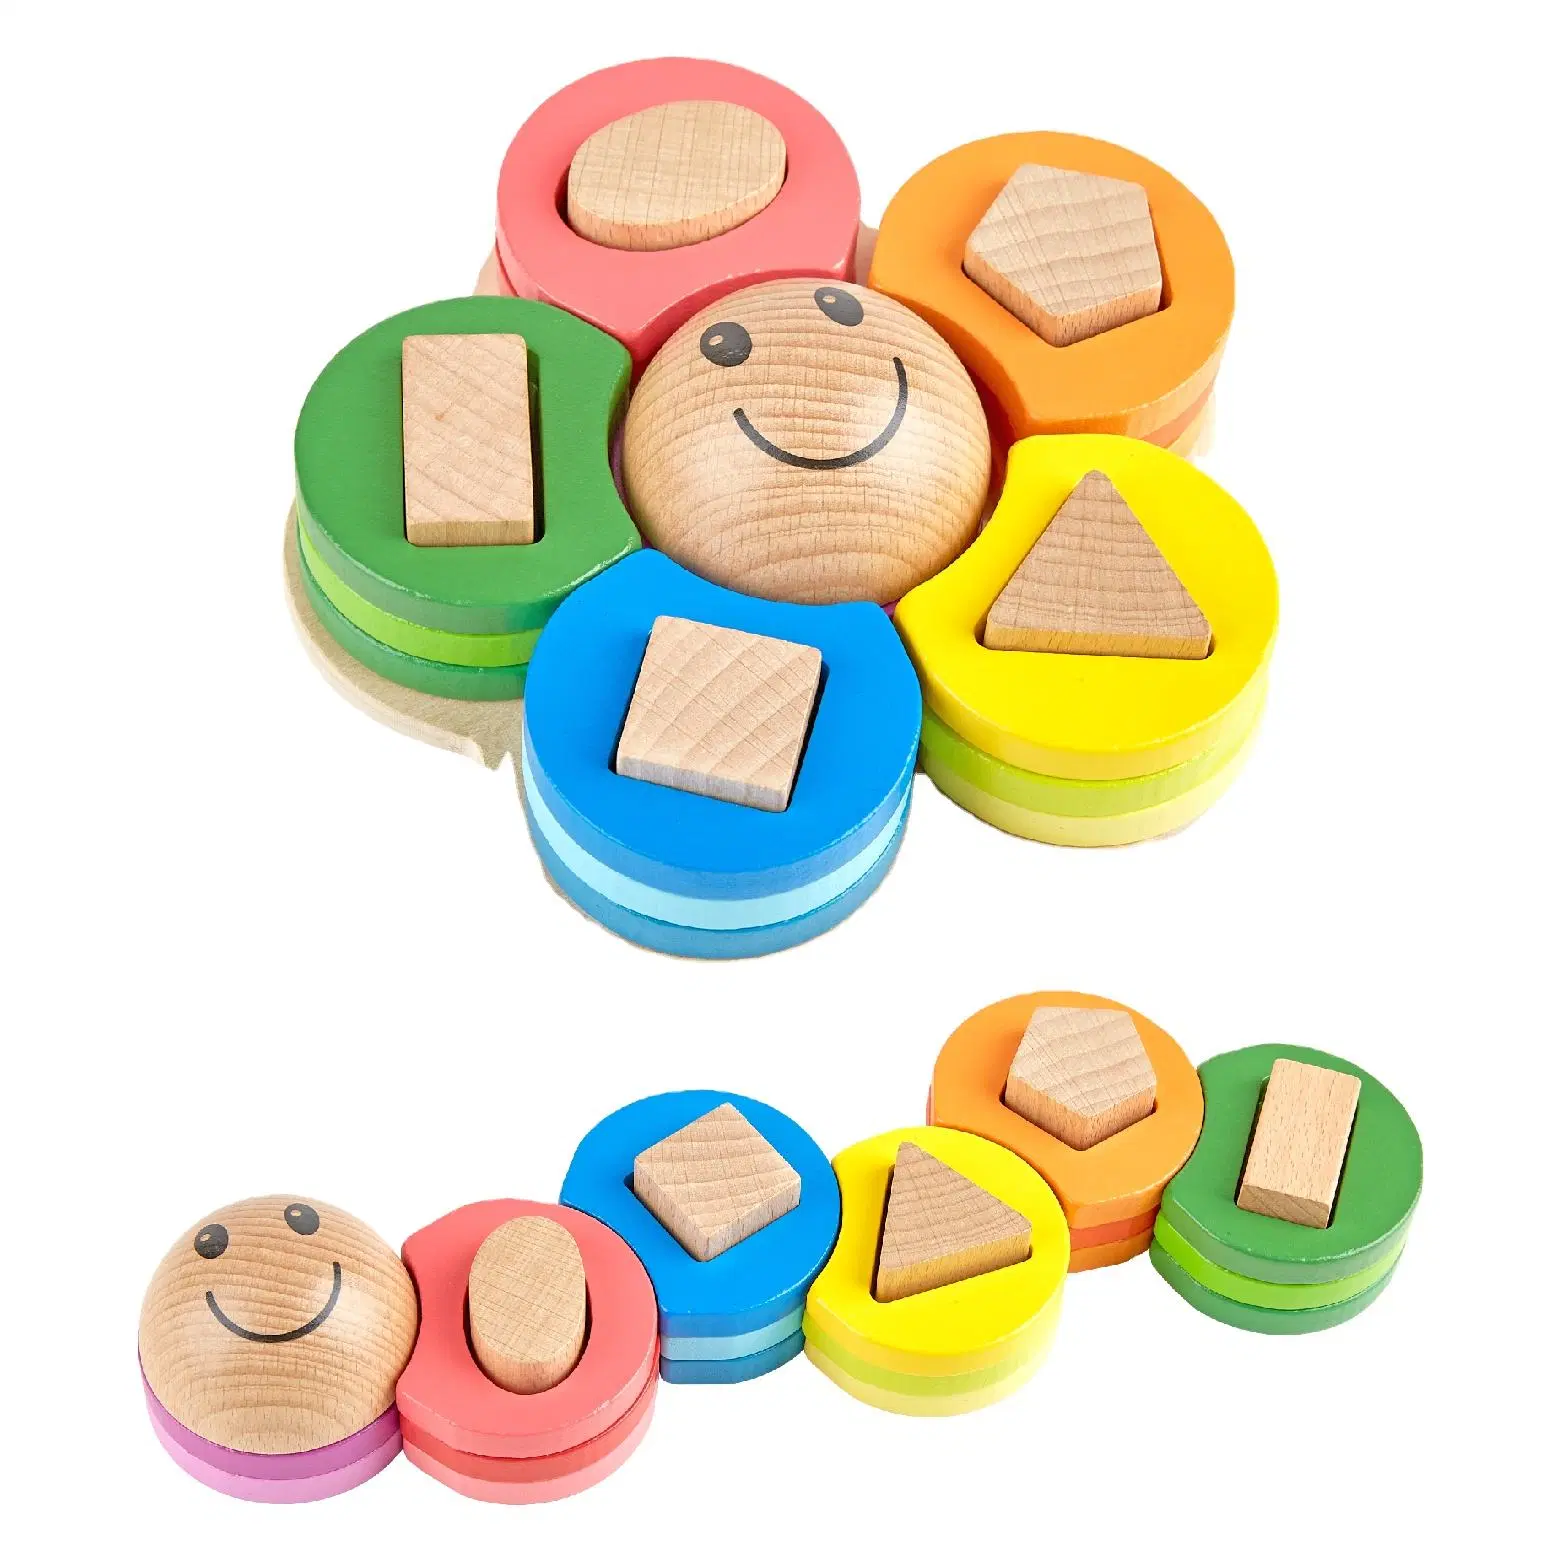 Wooden Toy Educational Learning Toys Montessori 3D Wooden Puzzle, Caterpillar Flower DIY Puzzle